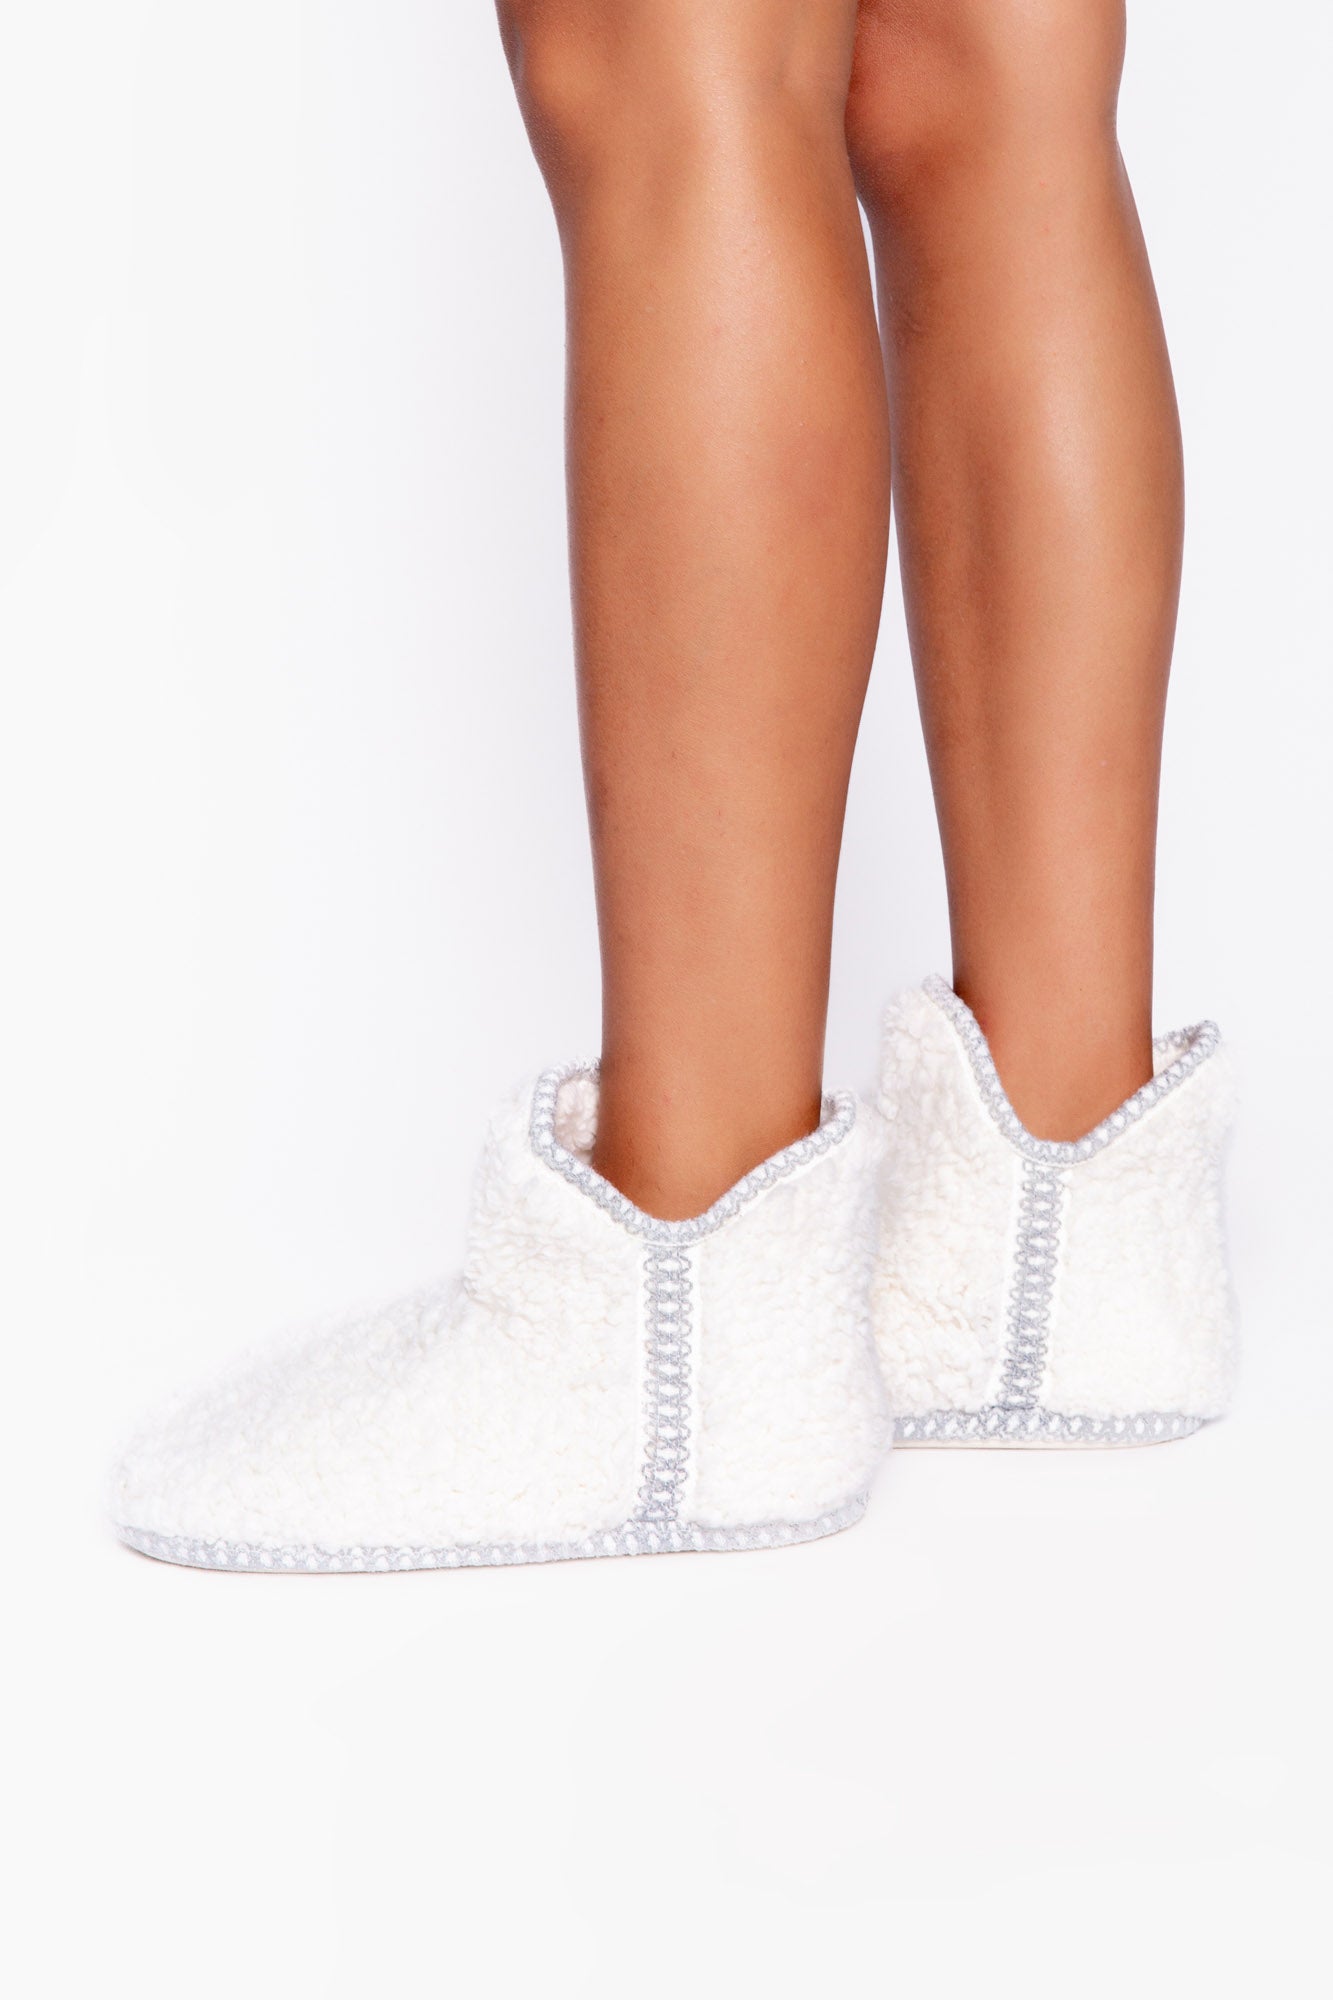 Cozy Knit Booties